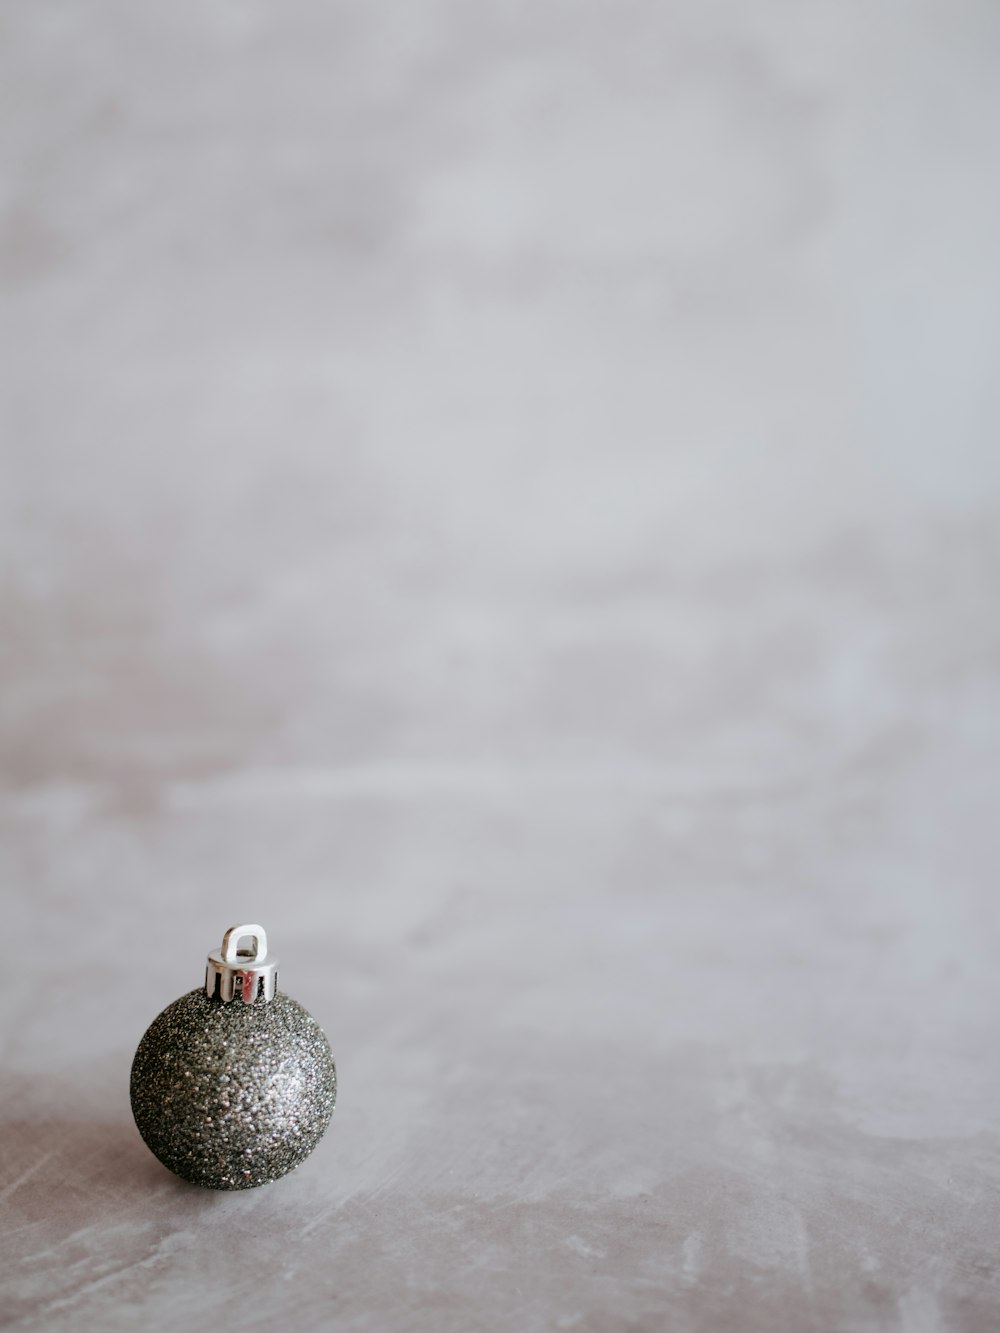 gray bauble on gray surface